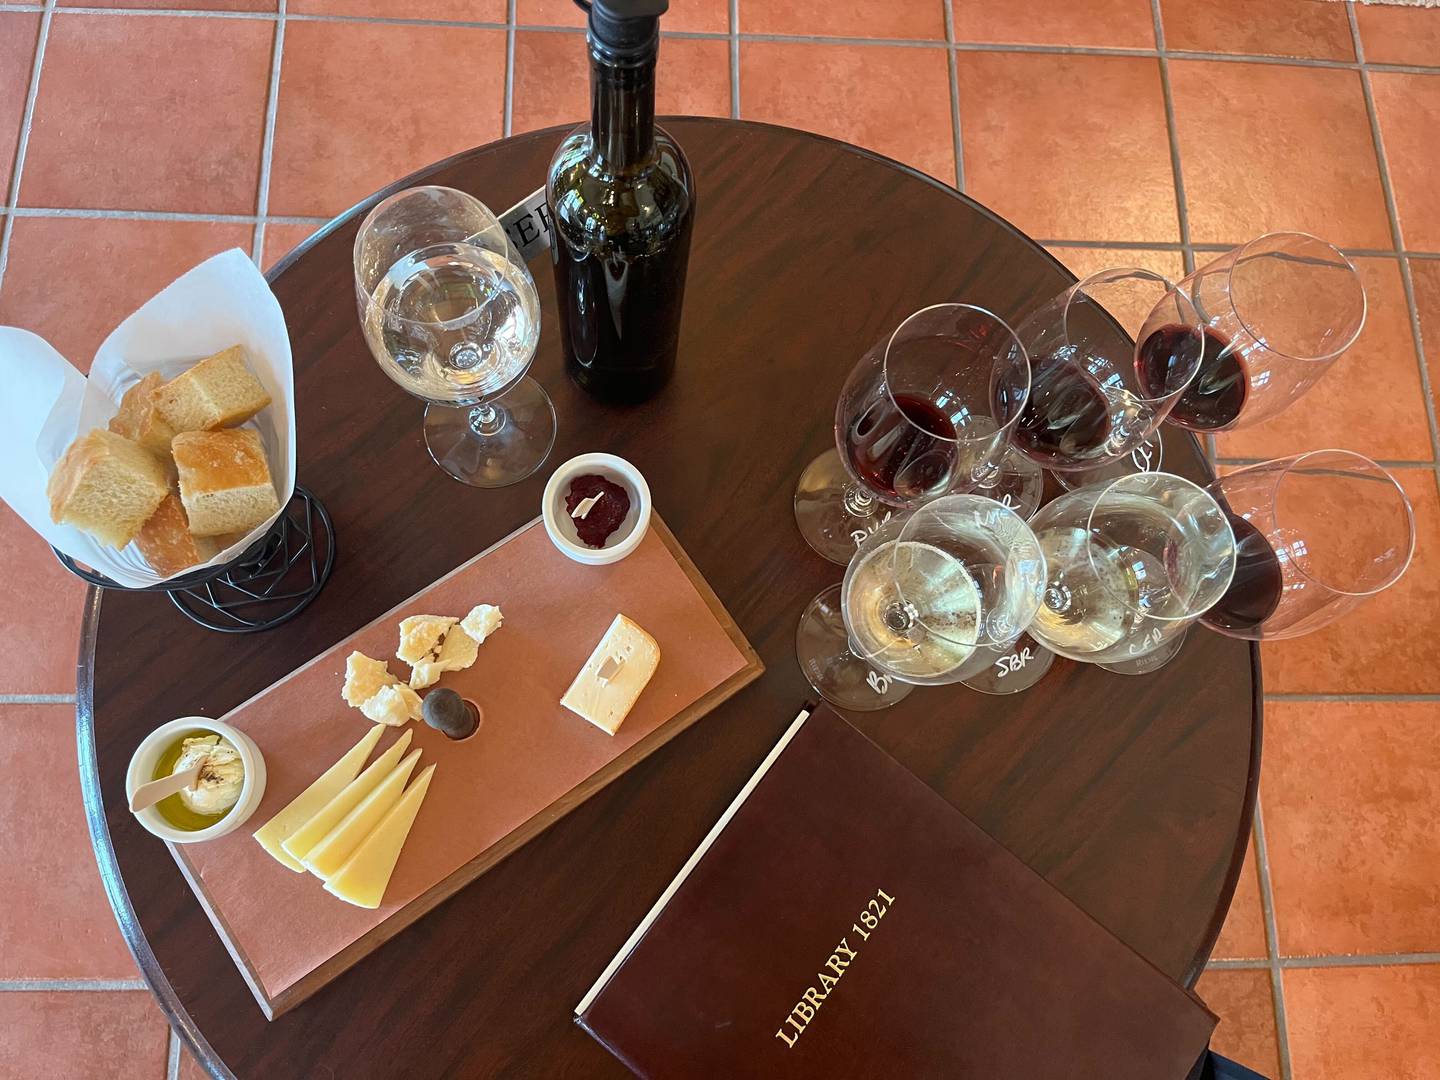 Library 1821 has a cheese and meat charcuterie tray option to pair with their selections of wine. The goat cheese is a must try.